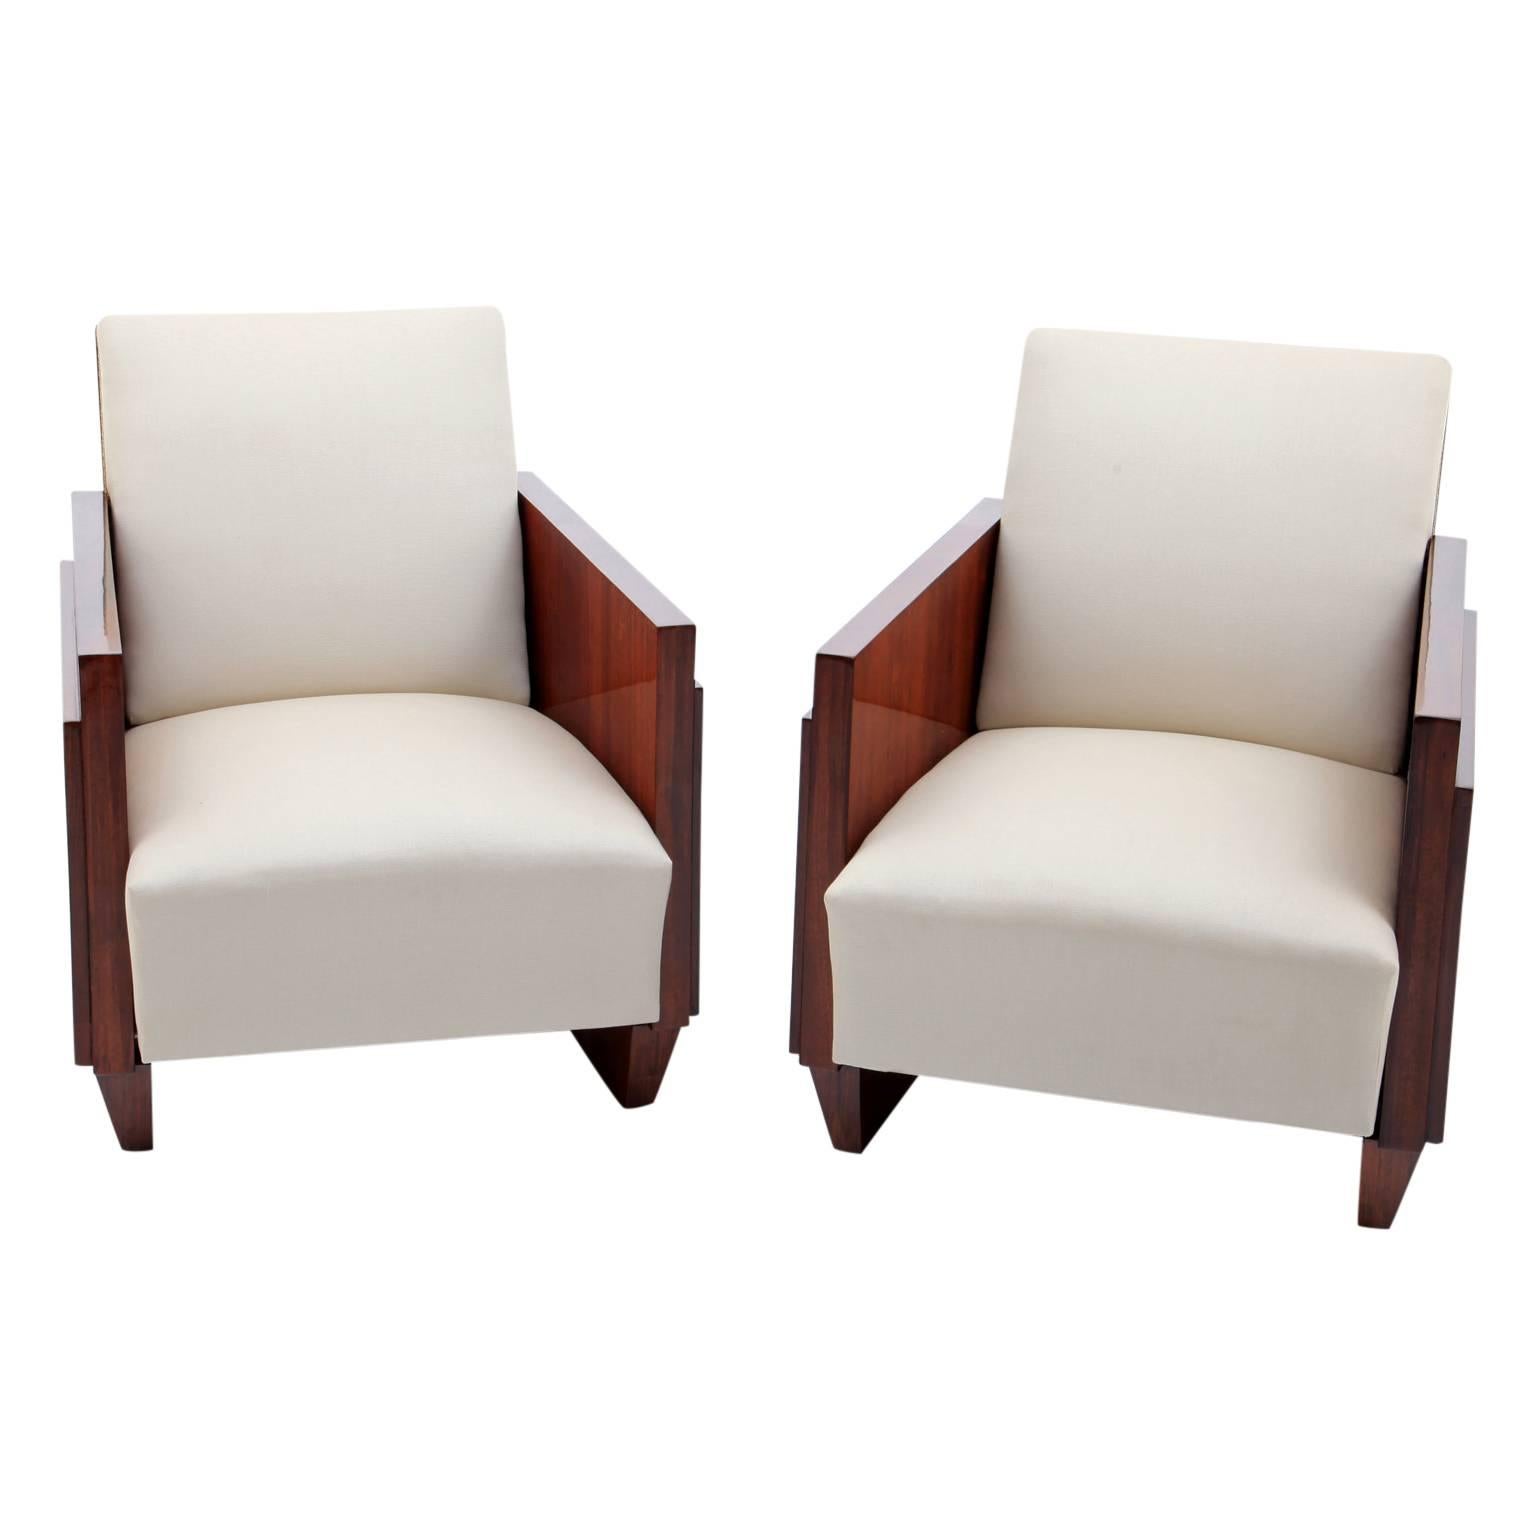 Pair of Art Deco lounge chairs in the style of Andre Sornay with rectangular armrests and thickly upholstered seat and backrest.